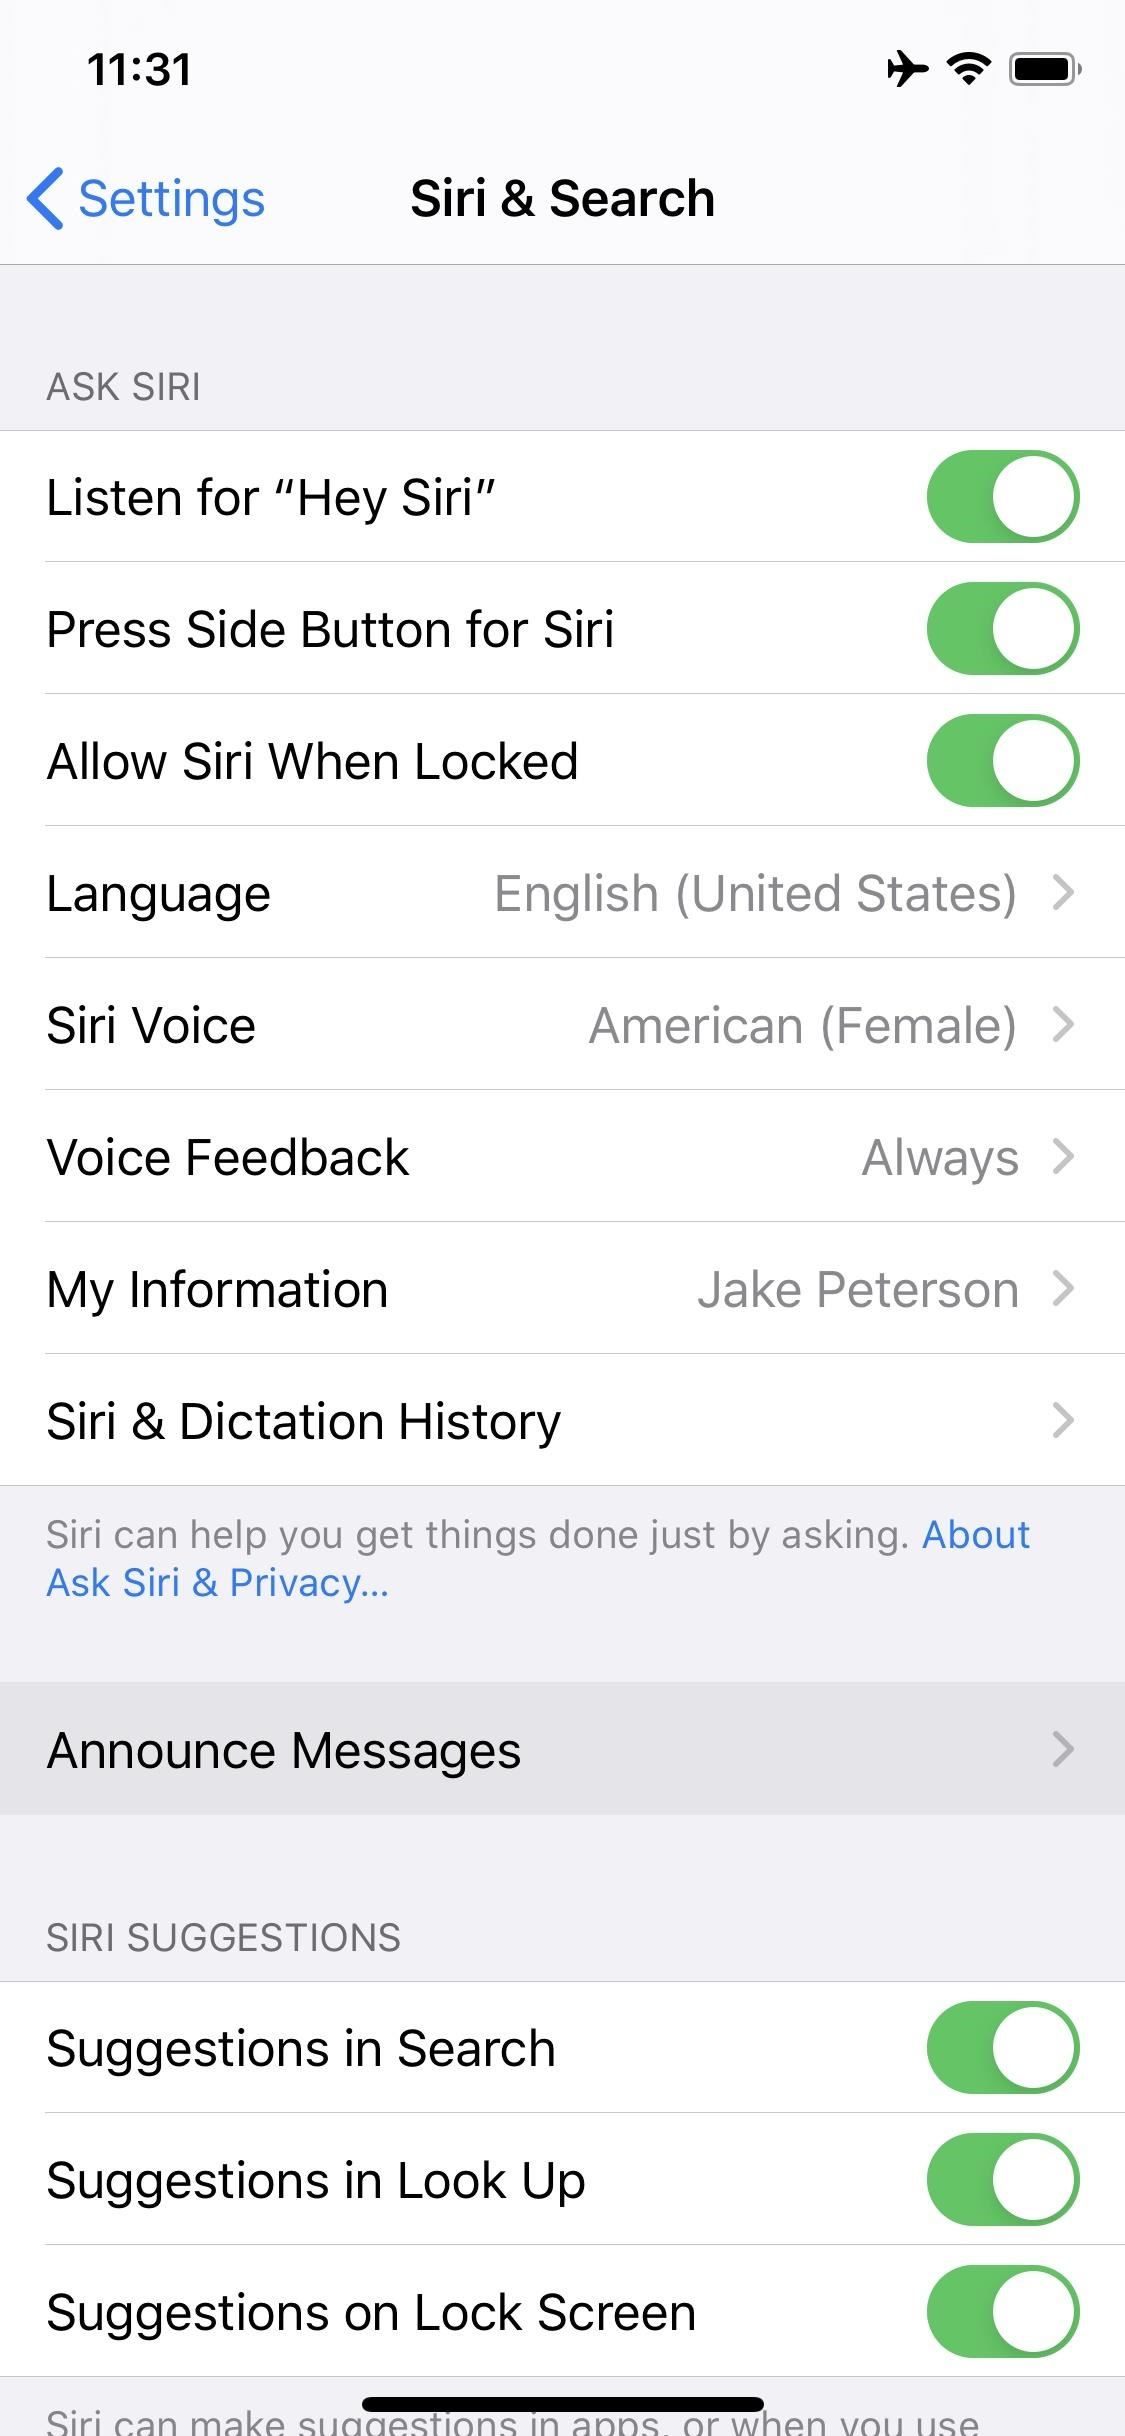 Reply to Texts on Your AirPods Without Siri Reading Out Your Messages